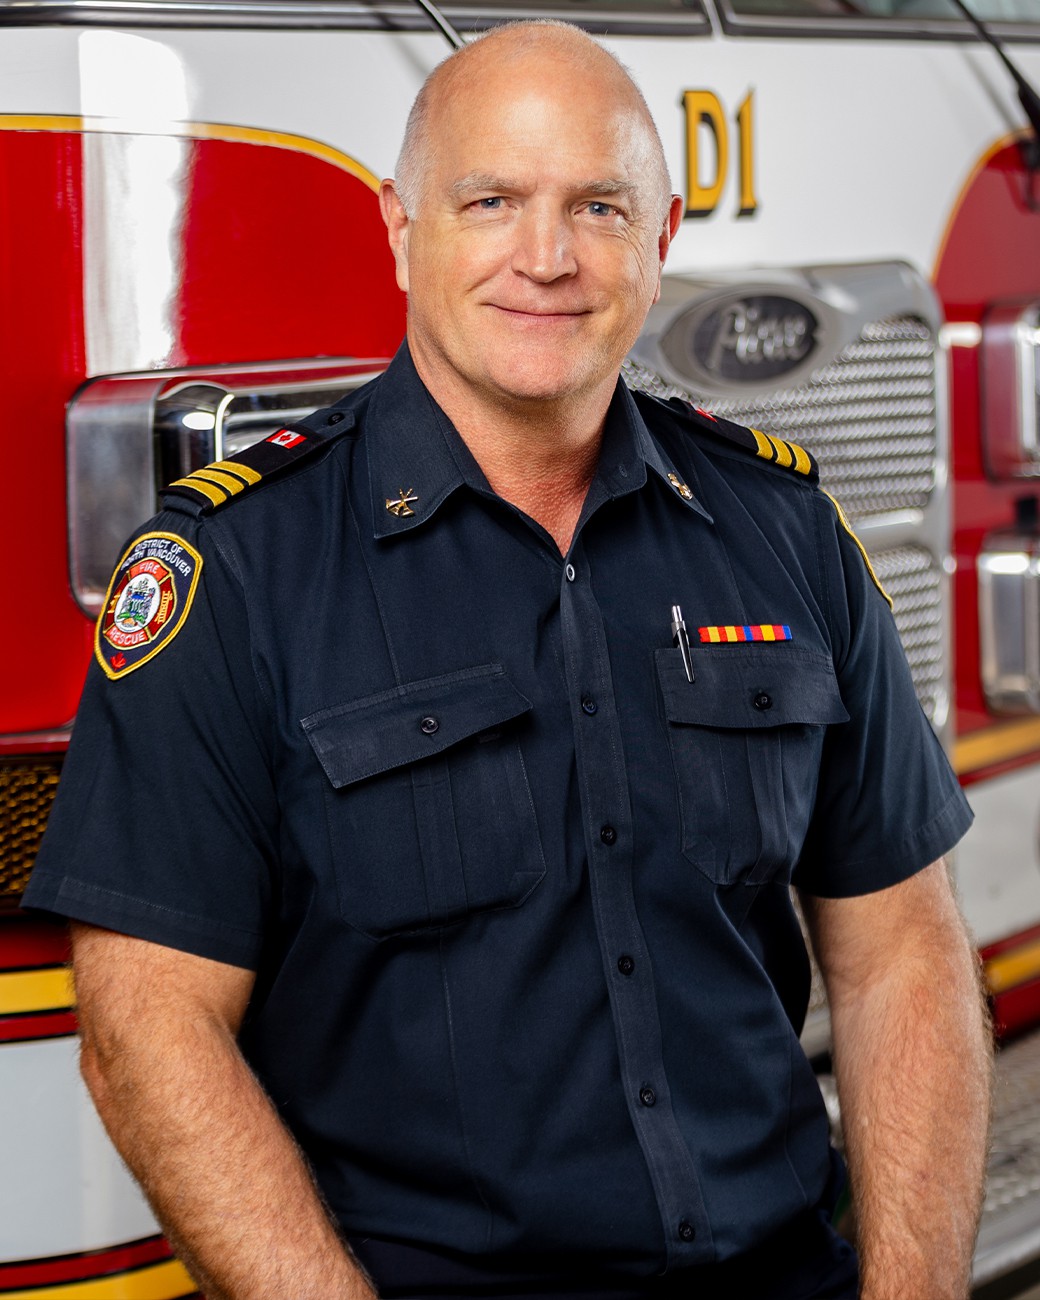 Assistant Fire Chief – Operations, Dwayne Derban